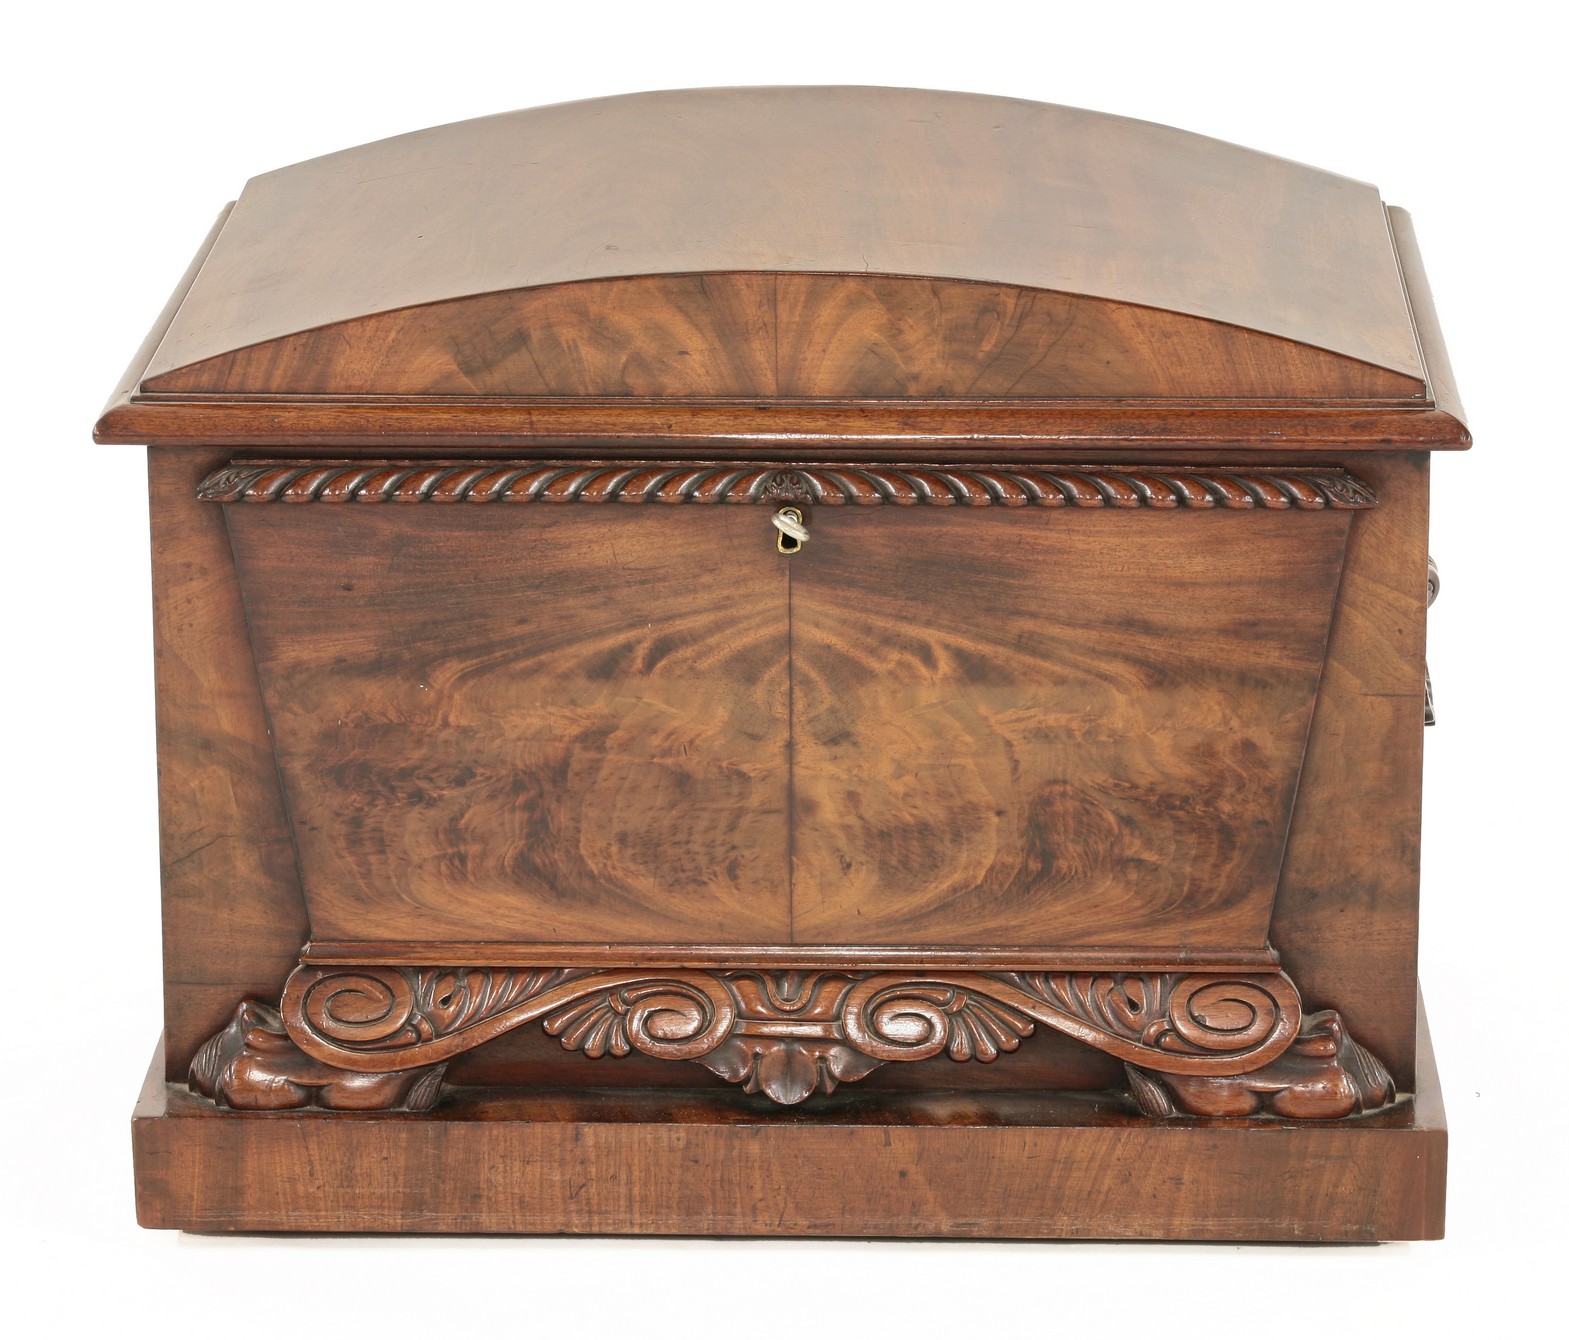 A Regency mahogany sarcophagus-shaped cellaret,
with domed cover and shell shaped handles, and a